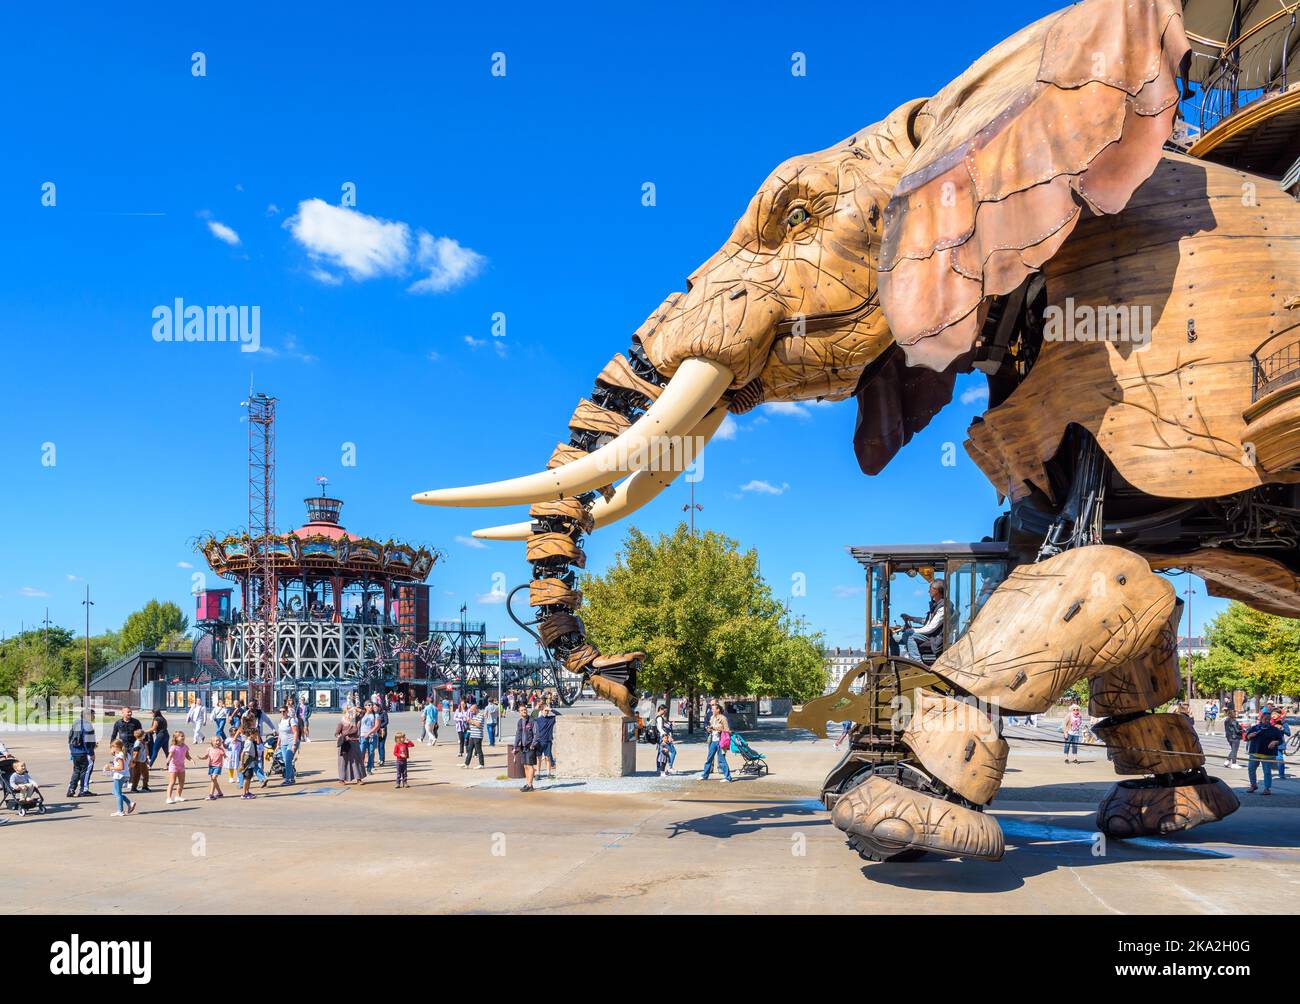 The Great Elephant giant puppet, part of the Machines of the Isle of Nantes attraction, with the Marine Worlds Carousel in the distance. Stock Photo